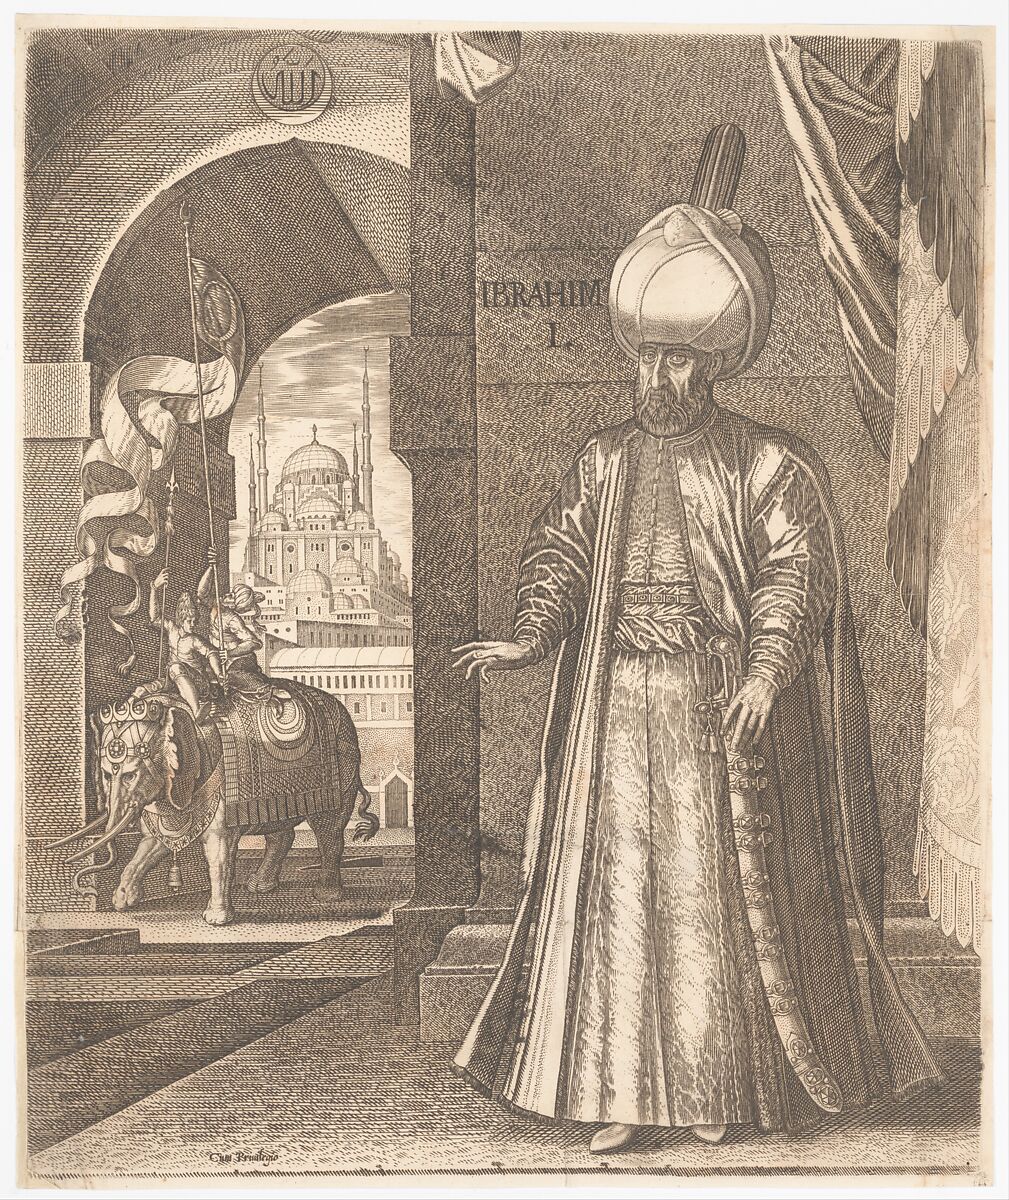 Sultan Süleyman and the Süleymaniye Mosque, Constantinople, 1574 (or earlier), altered in 1688 to represent Ibrahim I, Melchior Lorck (Danish, Flensburg 1526–after 1588 Hamburg (?)), Engraving 